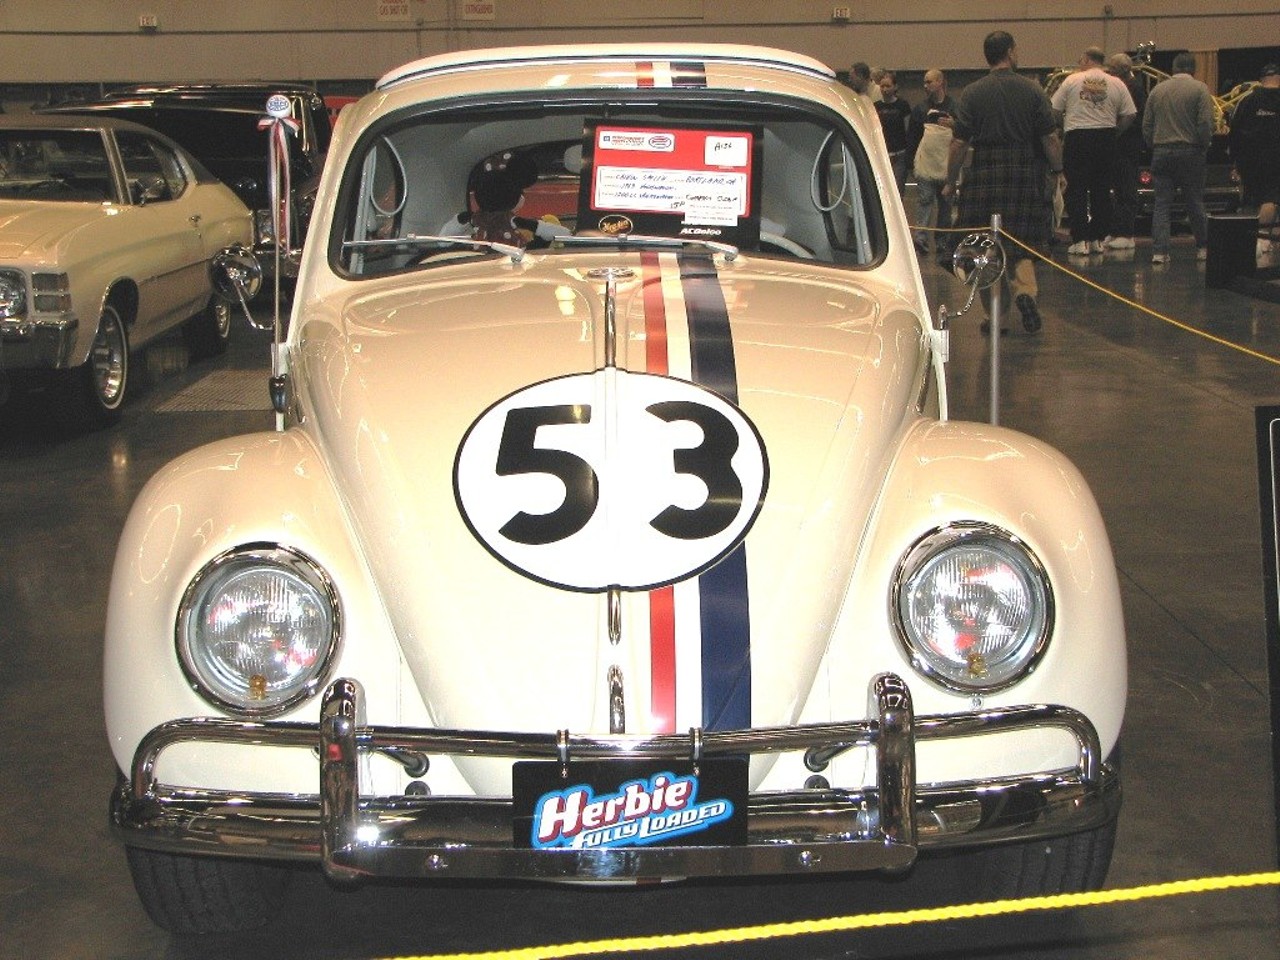 Grand Prix Movie in the ParkThe City of St. Petersburg is showing Herbie Fully Loaded in North Straub Park.Fri., Mar. 8, 5:30-7:30 p.m.
Photo via Wikimedia Commons. No machine-readable author provided. Moribunt assumed (based on copyright claims). [CC BY-SA 2.5 (https://creativecommons.org/licenses/by-sa/2.5)]